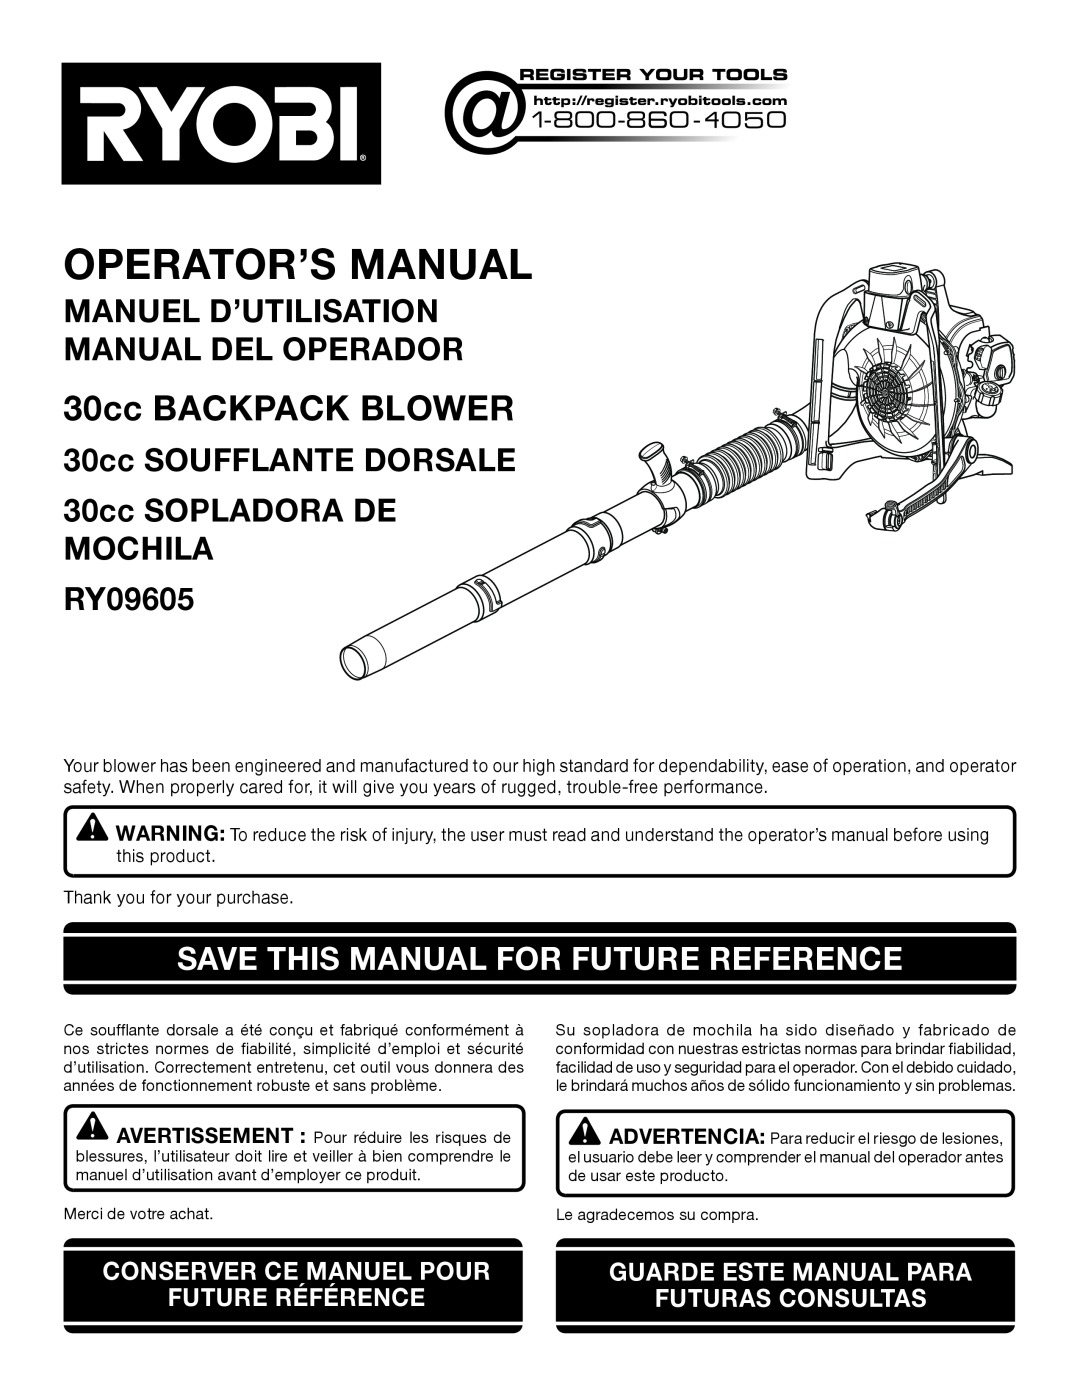 Ryobi RY09605 manuel dutilisation 30cc BACKPACK BLOWER, Save This Manual For Future Reference, Operator’S Manual 